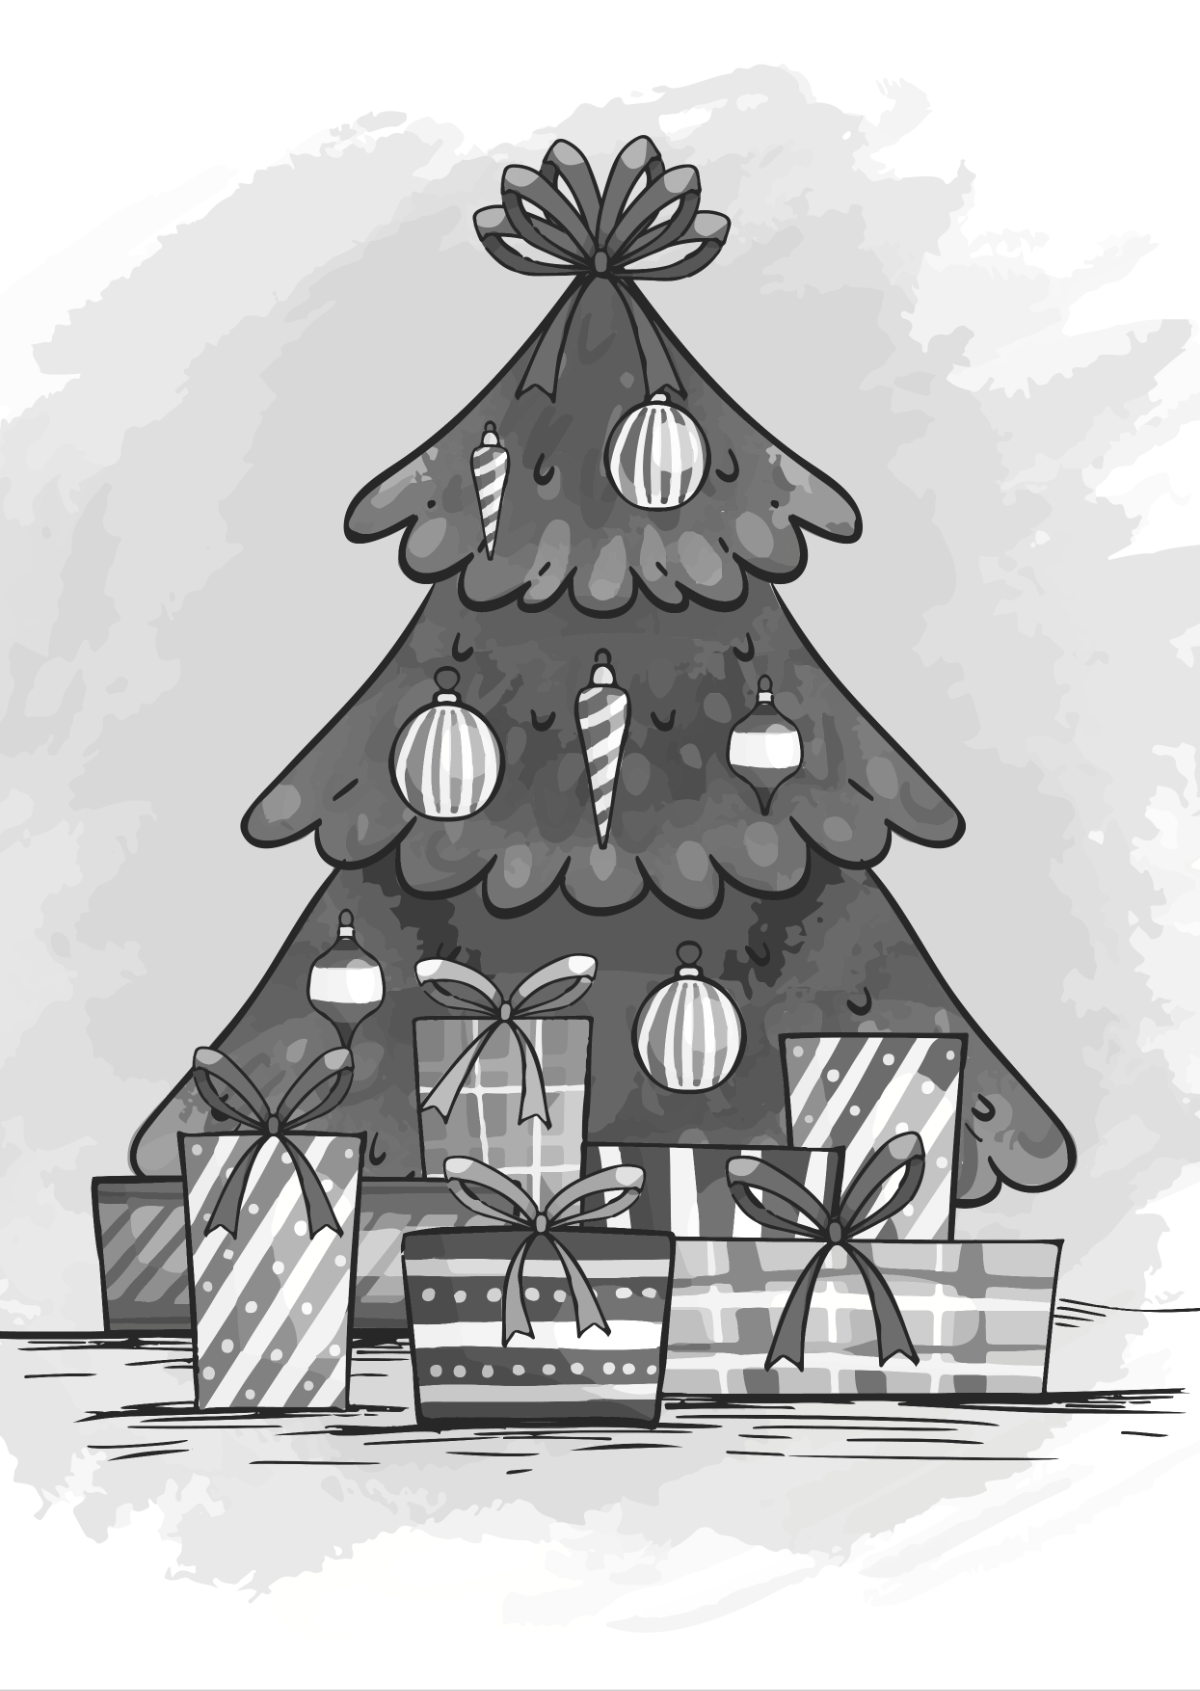 How to Draw a Christmas Tree - Bringing the Holidays to Paper